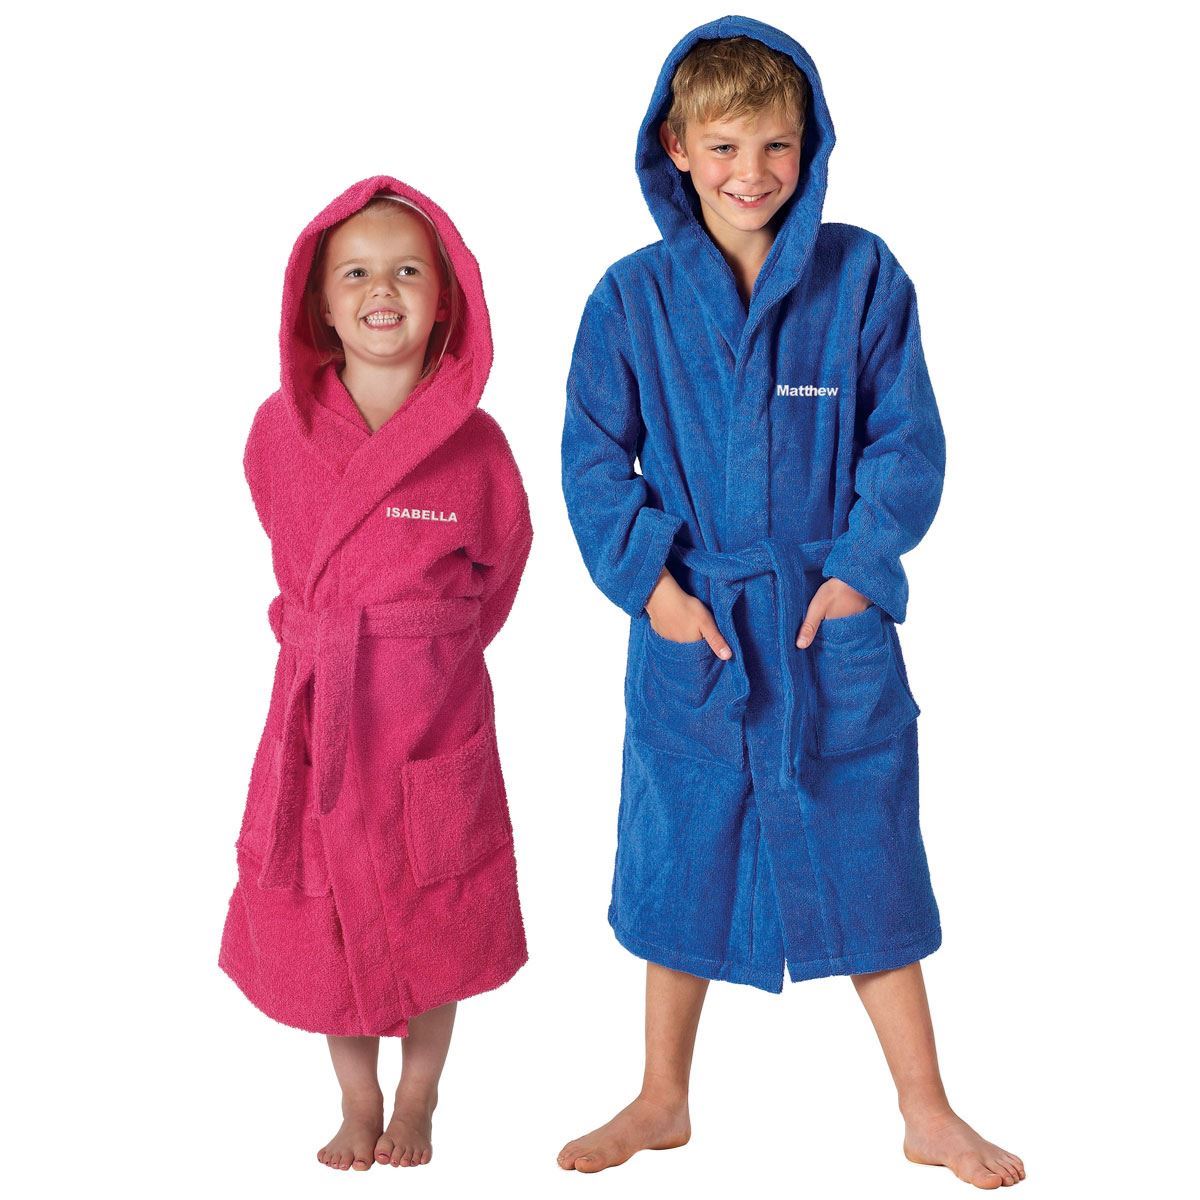 Towelling Bath Robe | Personalised Towels & Robes | Mulberry Bush ...